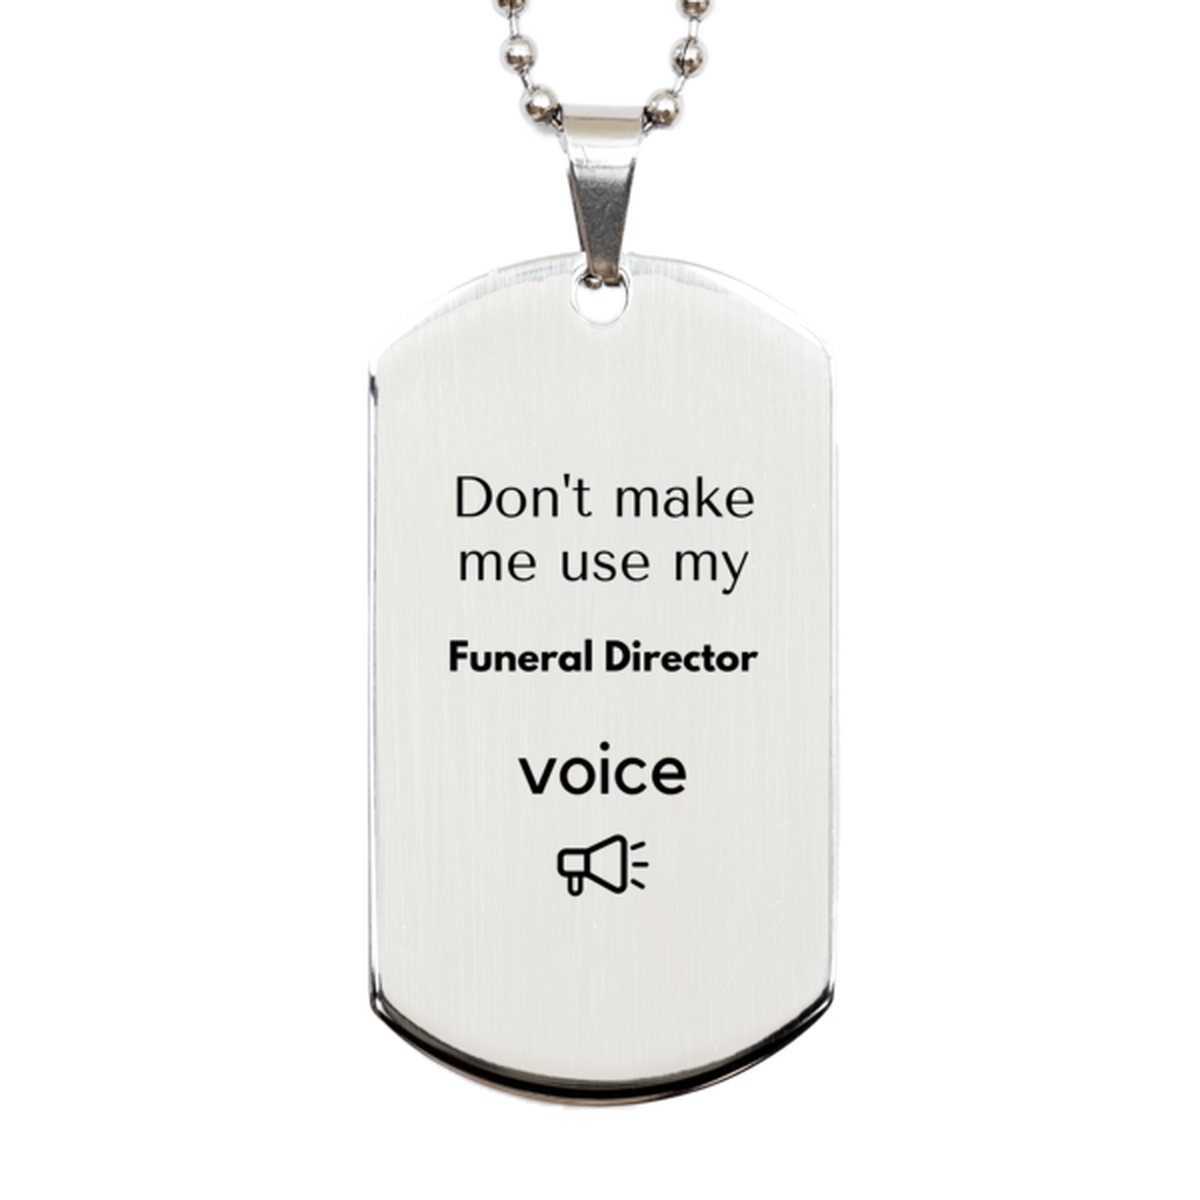 Don't make me use my Funeral Director voice, Sarcasm Funeral Director Gifts, Christmas Funeral Director Silver Dog Tag Birthday Unique Gifts For Funeral Director Coworkers, Men, Women, Colleague, Friends